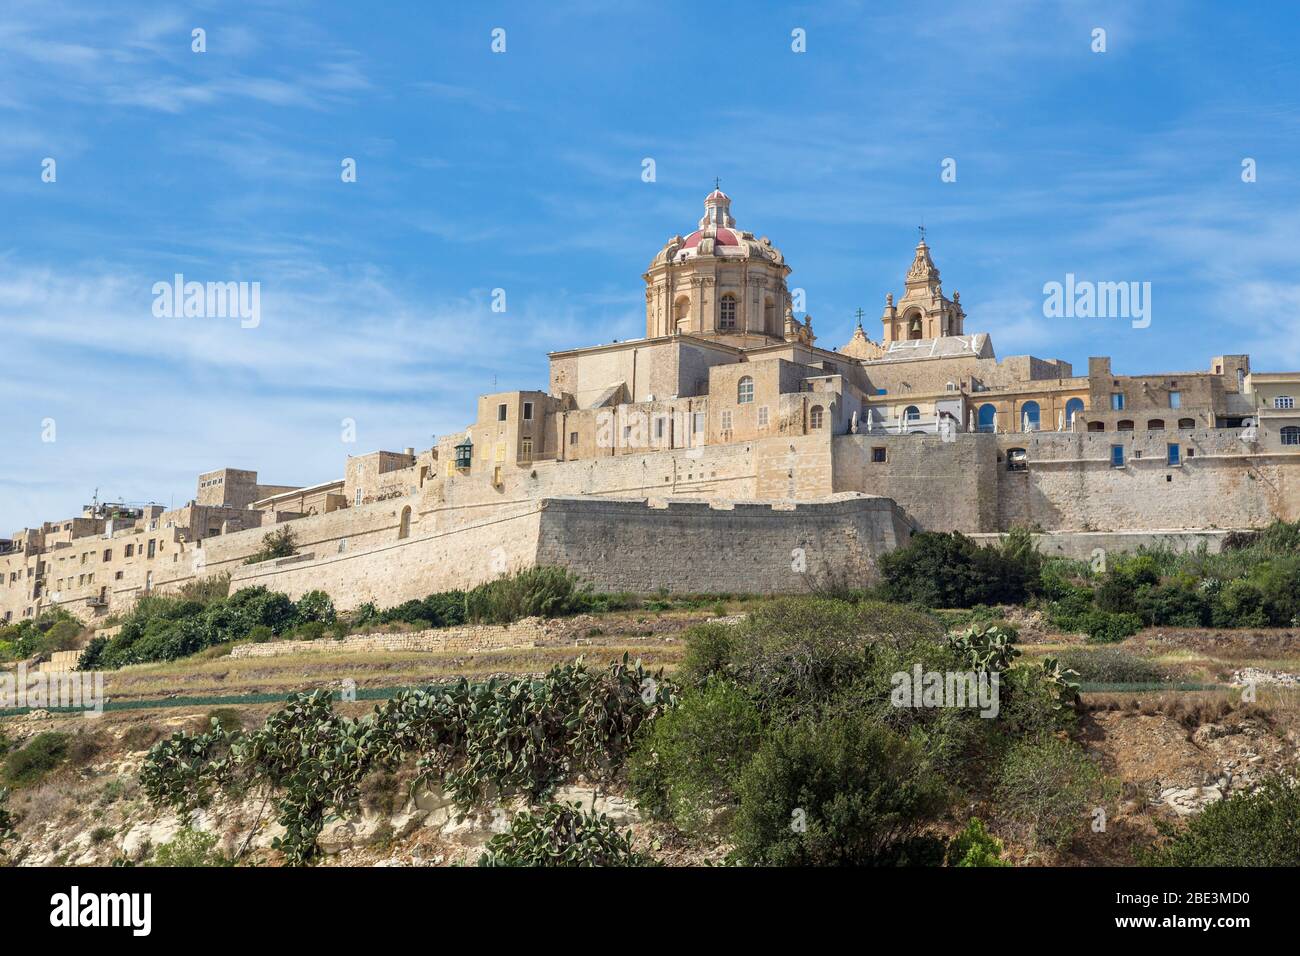 The Mosta Dome and the Silent City of Mdina, Malta Stock Photo